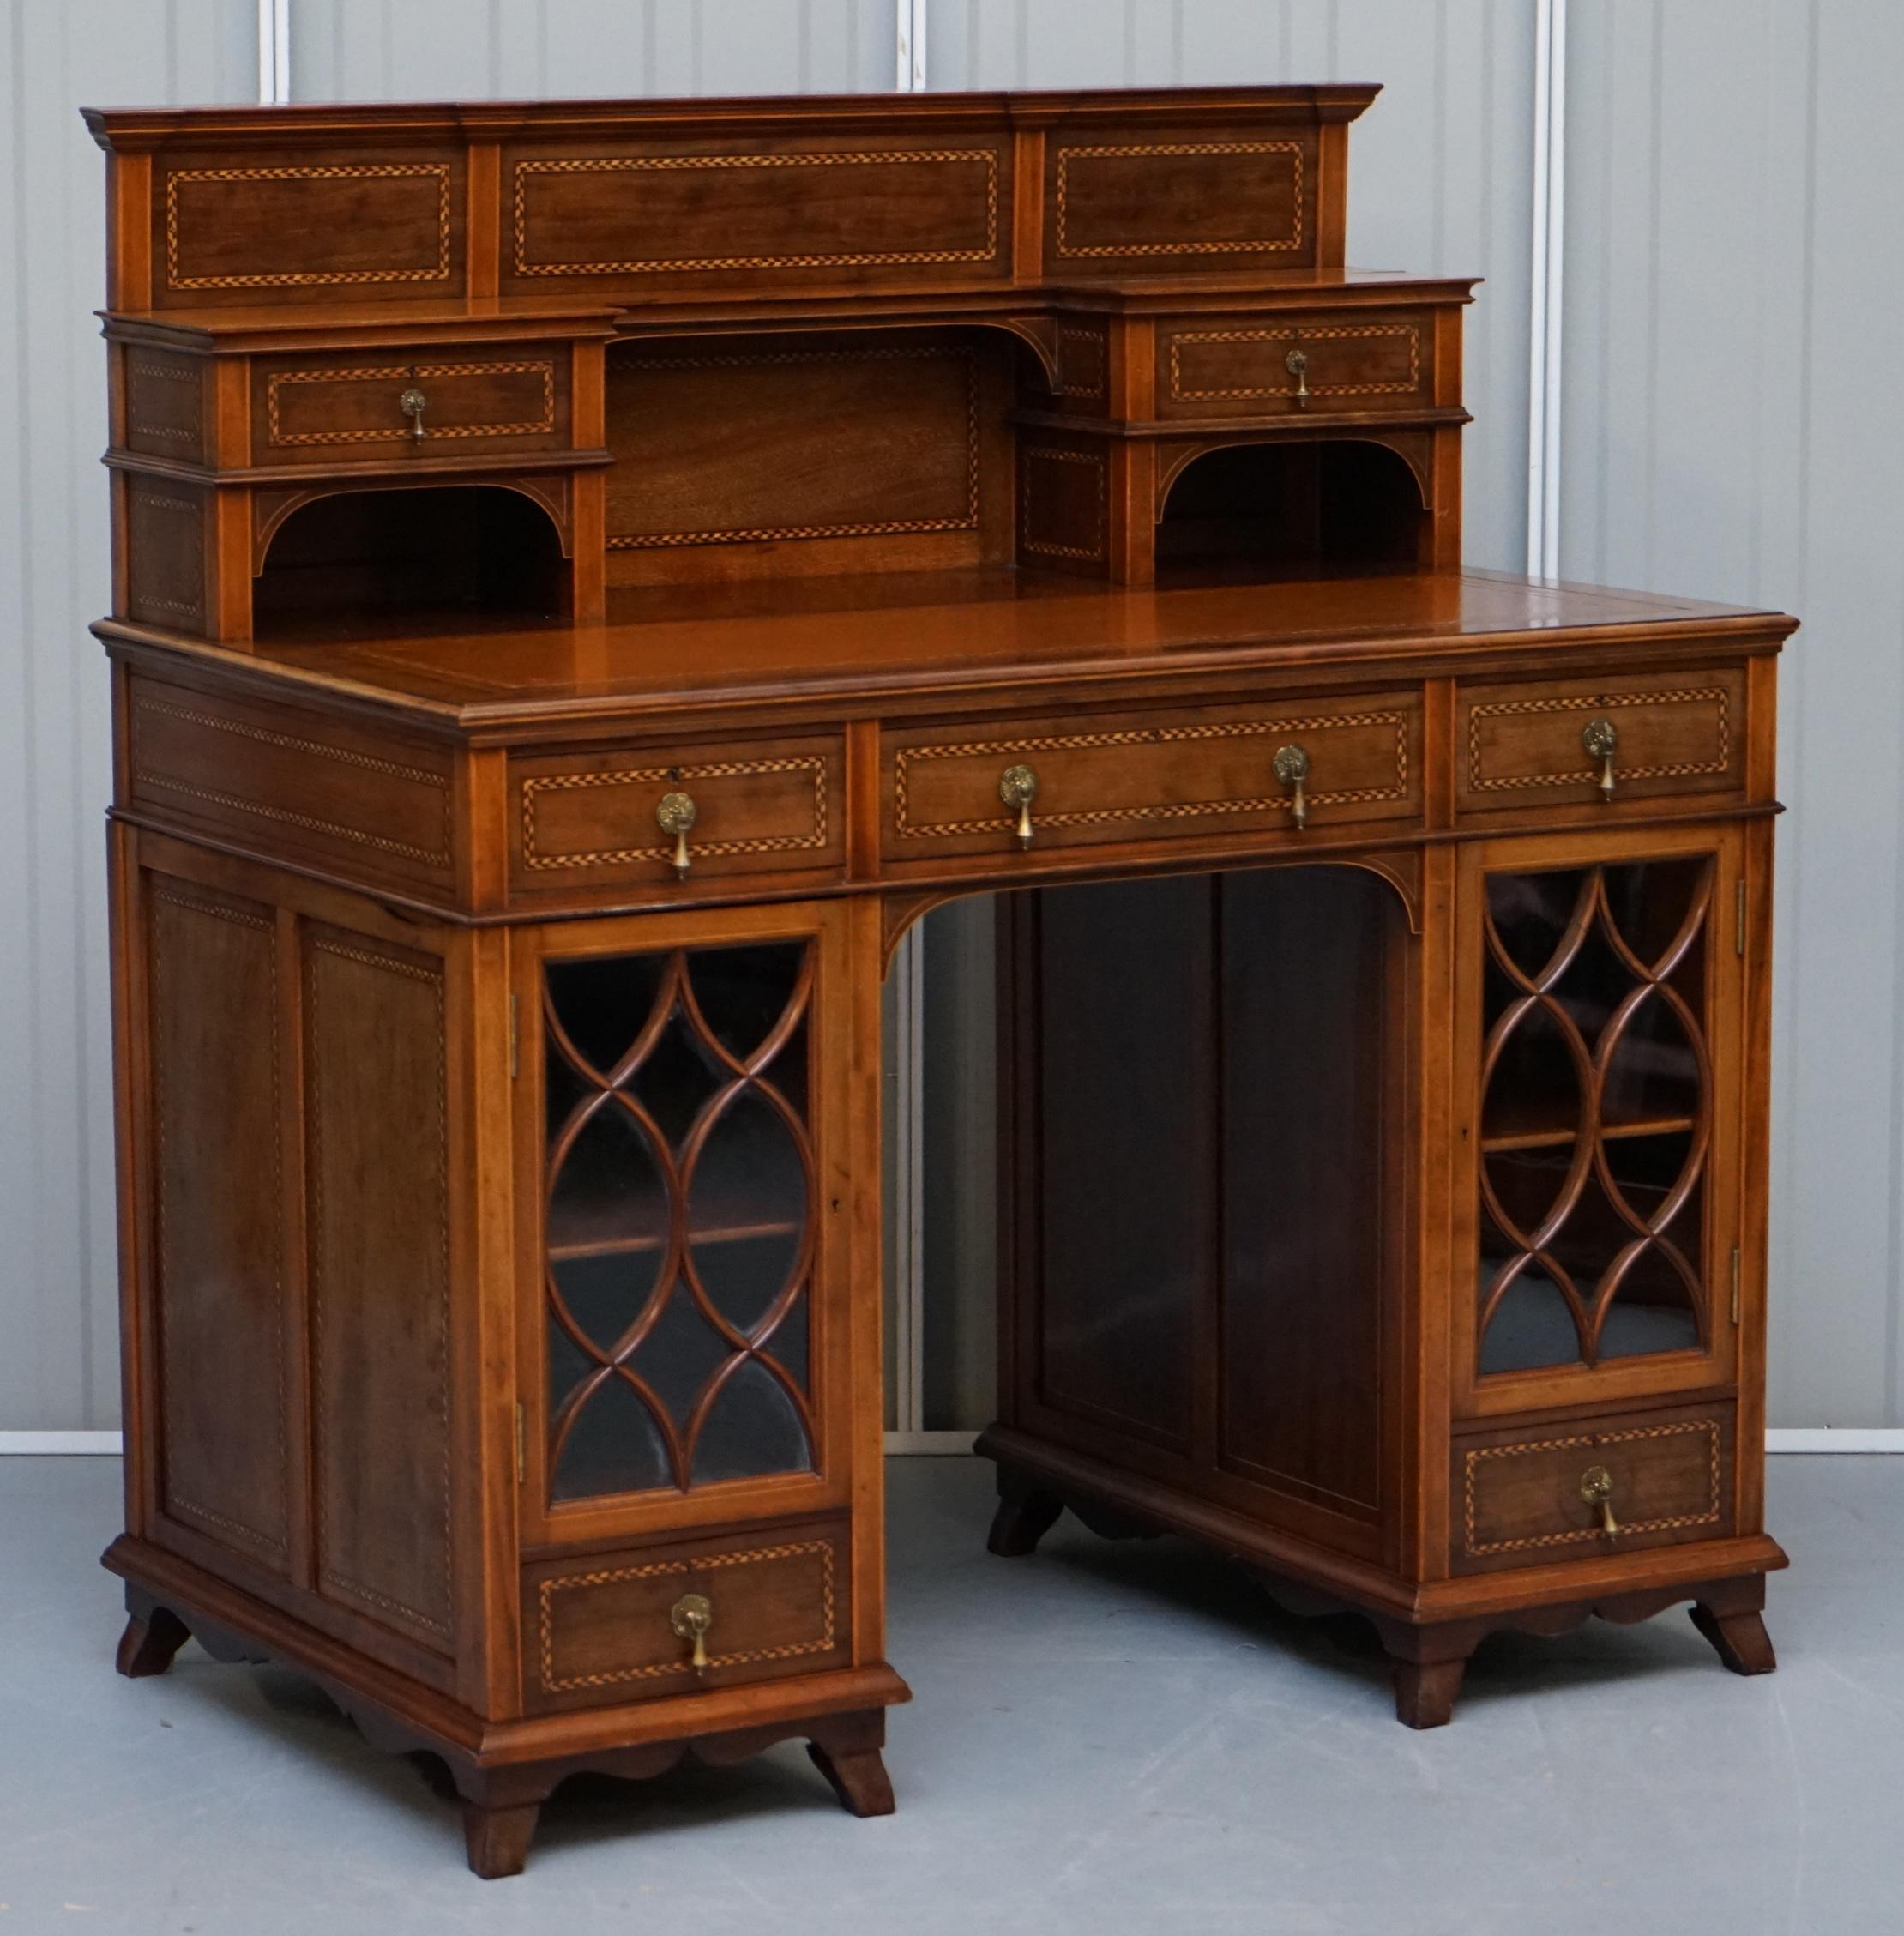 We are delighted to offer for sale this lightly restored very rare original fully stamped Morris & Co Walnut Dickens desk circa 1880 Victorian

Wow… just wow!!! I have never seen a desk of this quality before, it is absolutely pure genius Morris!